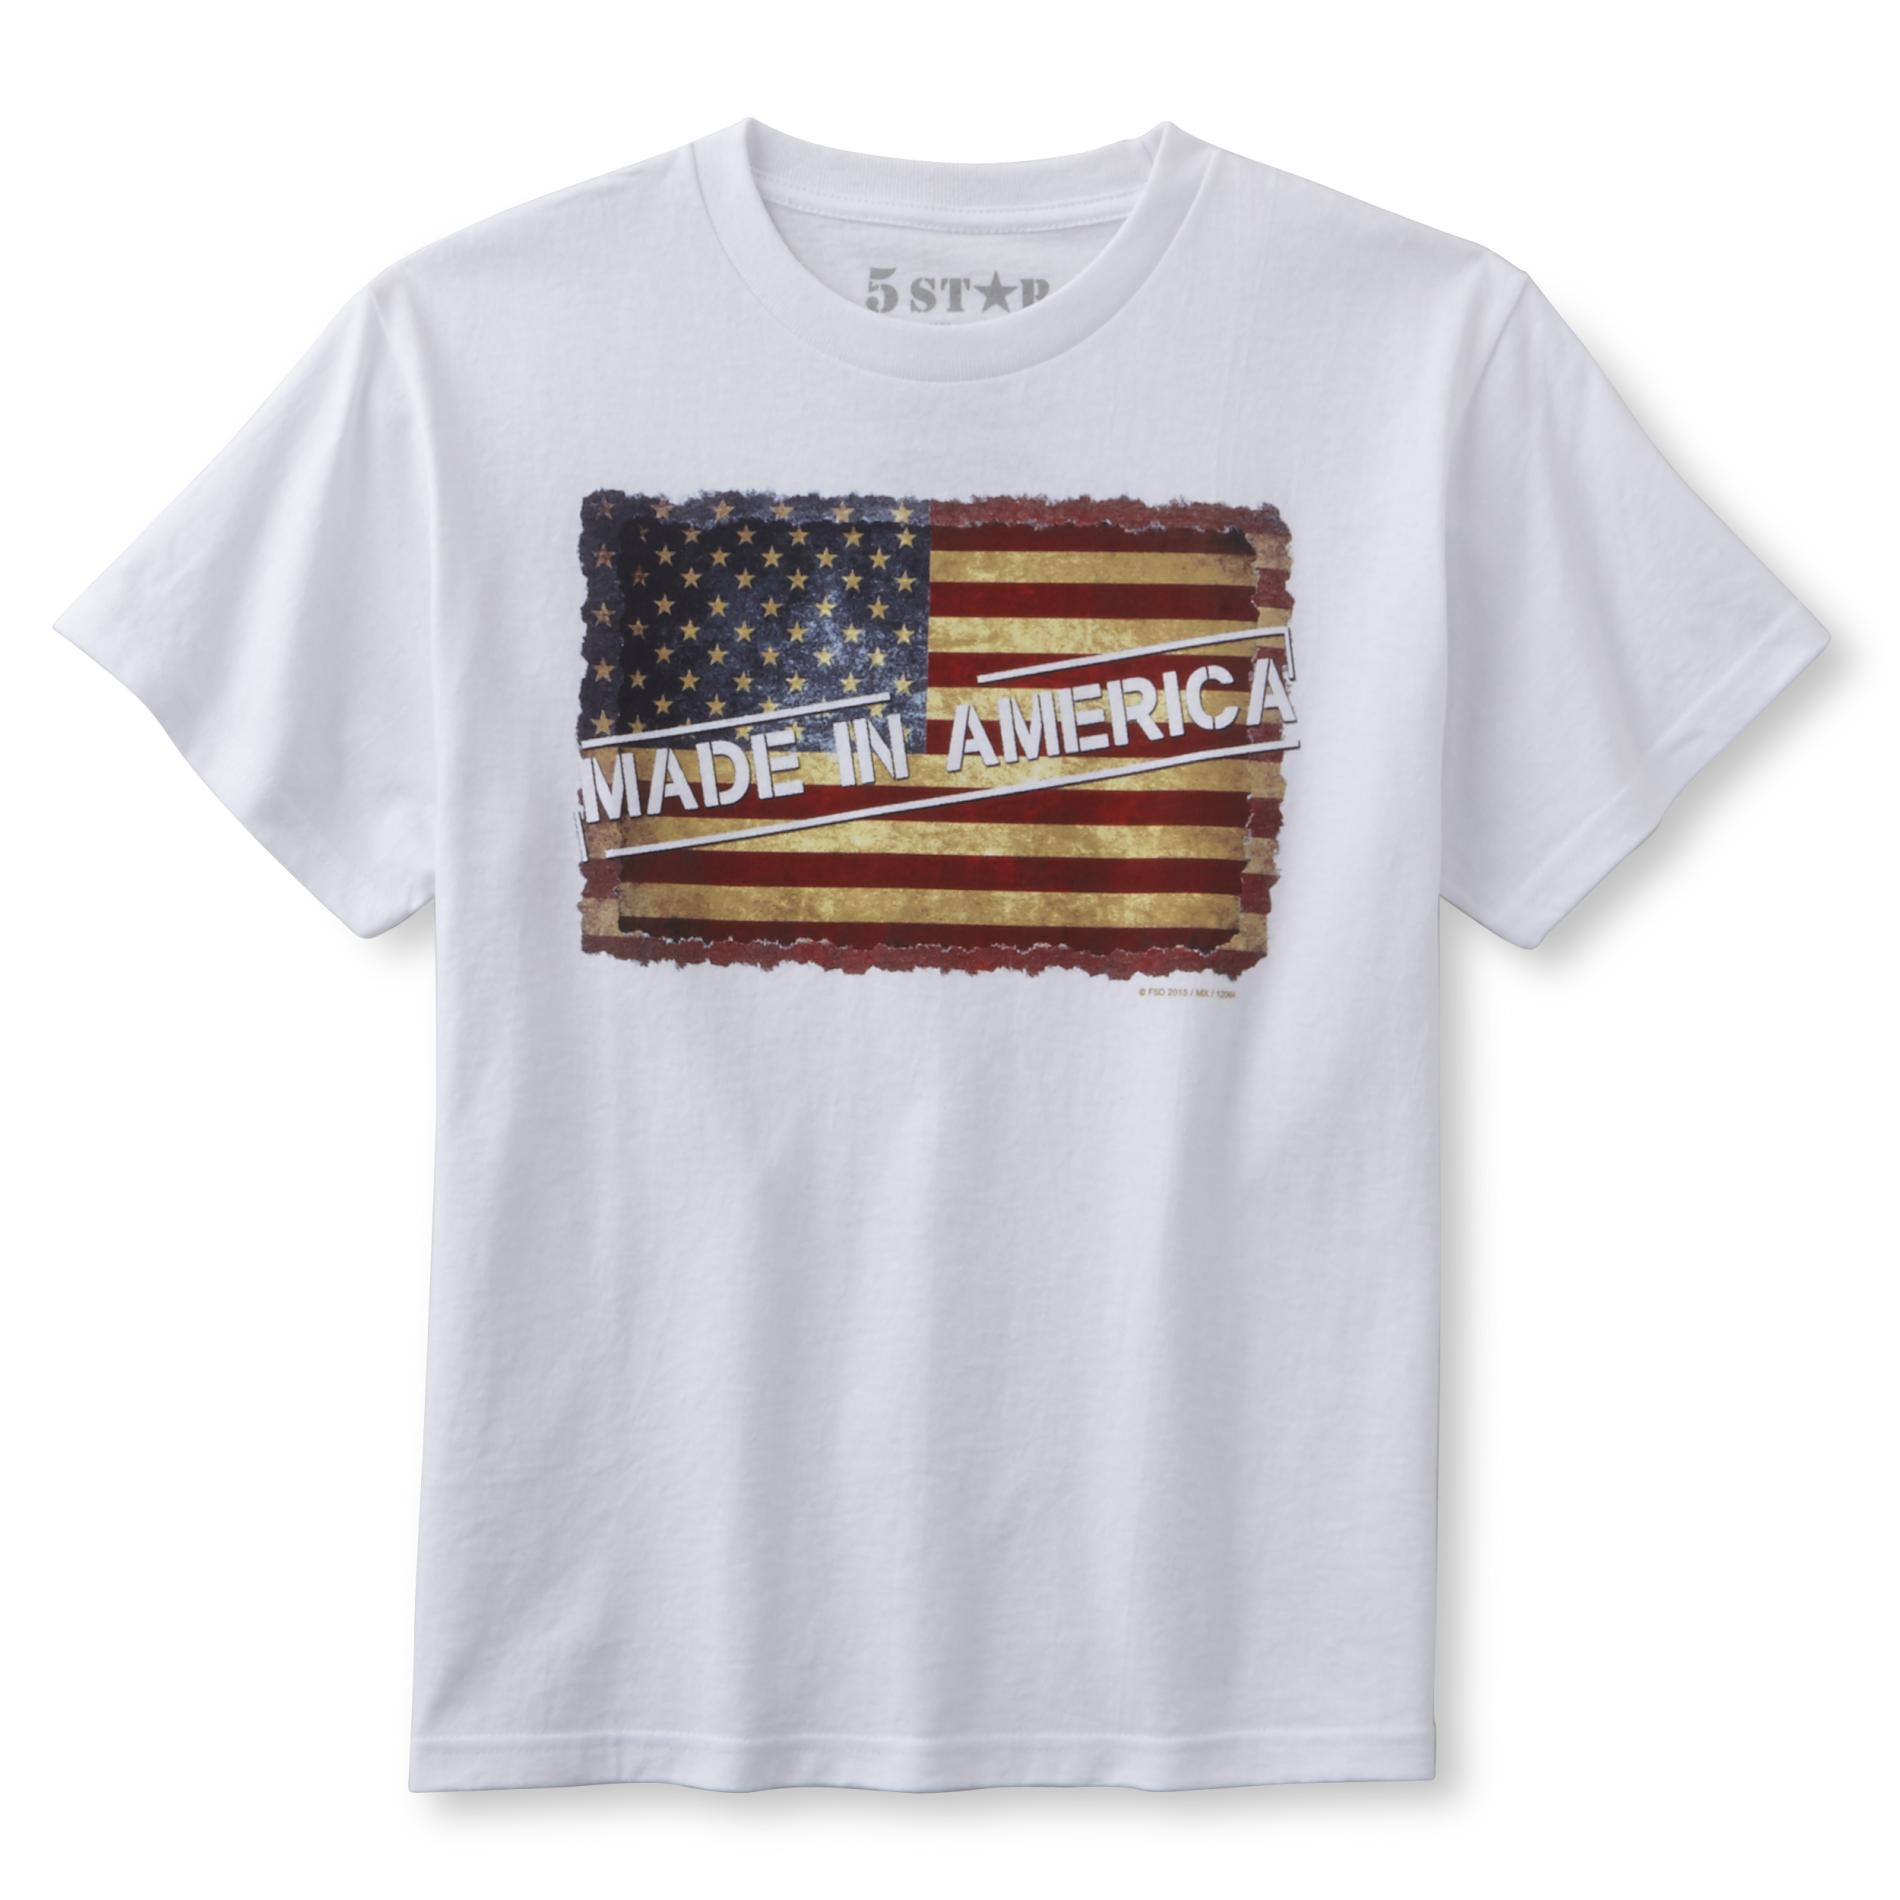 5Star Boy's Graphic T-Shirt - Made in America